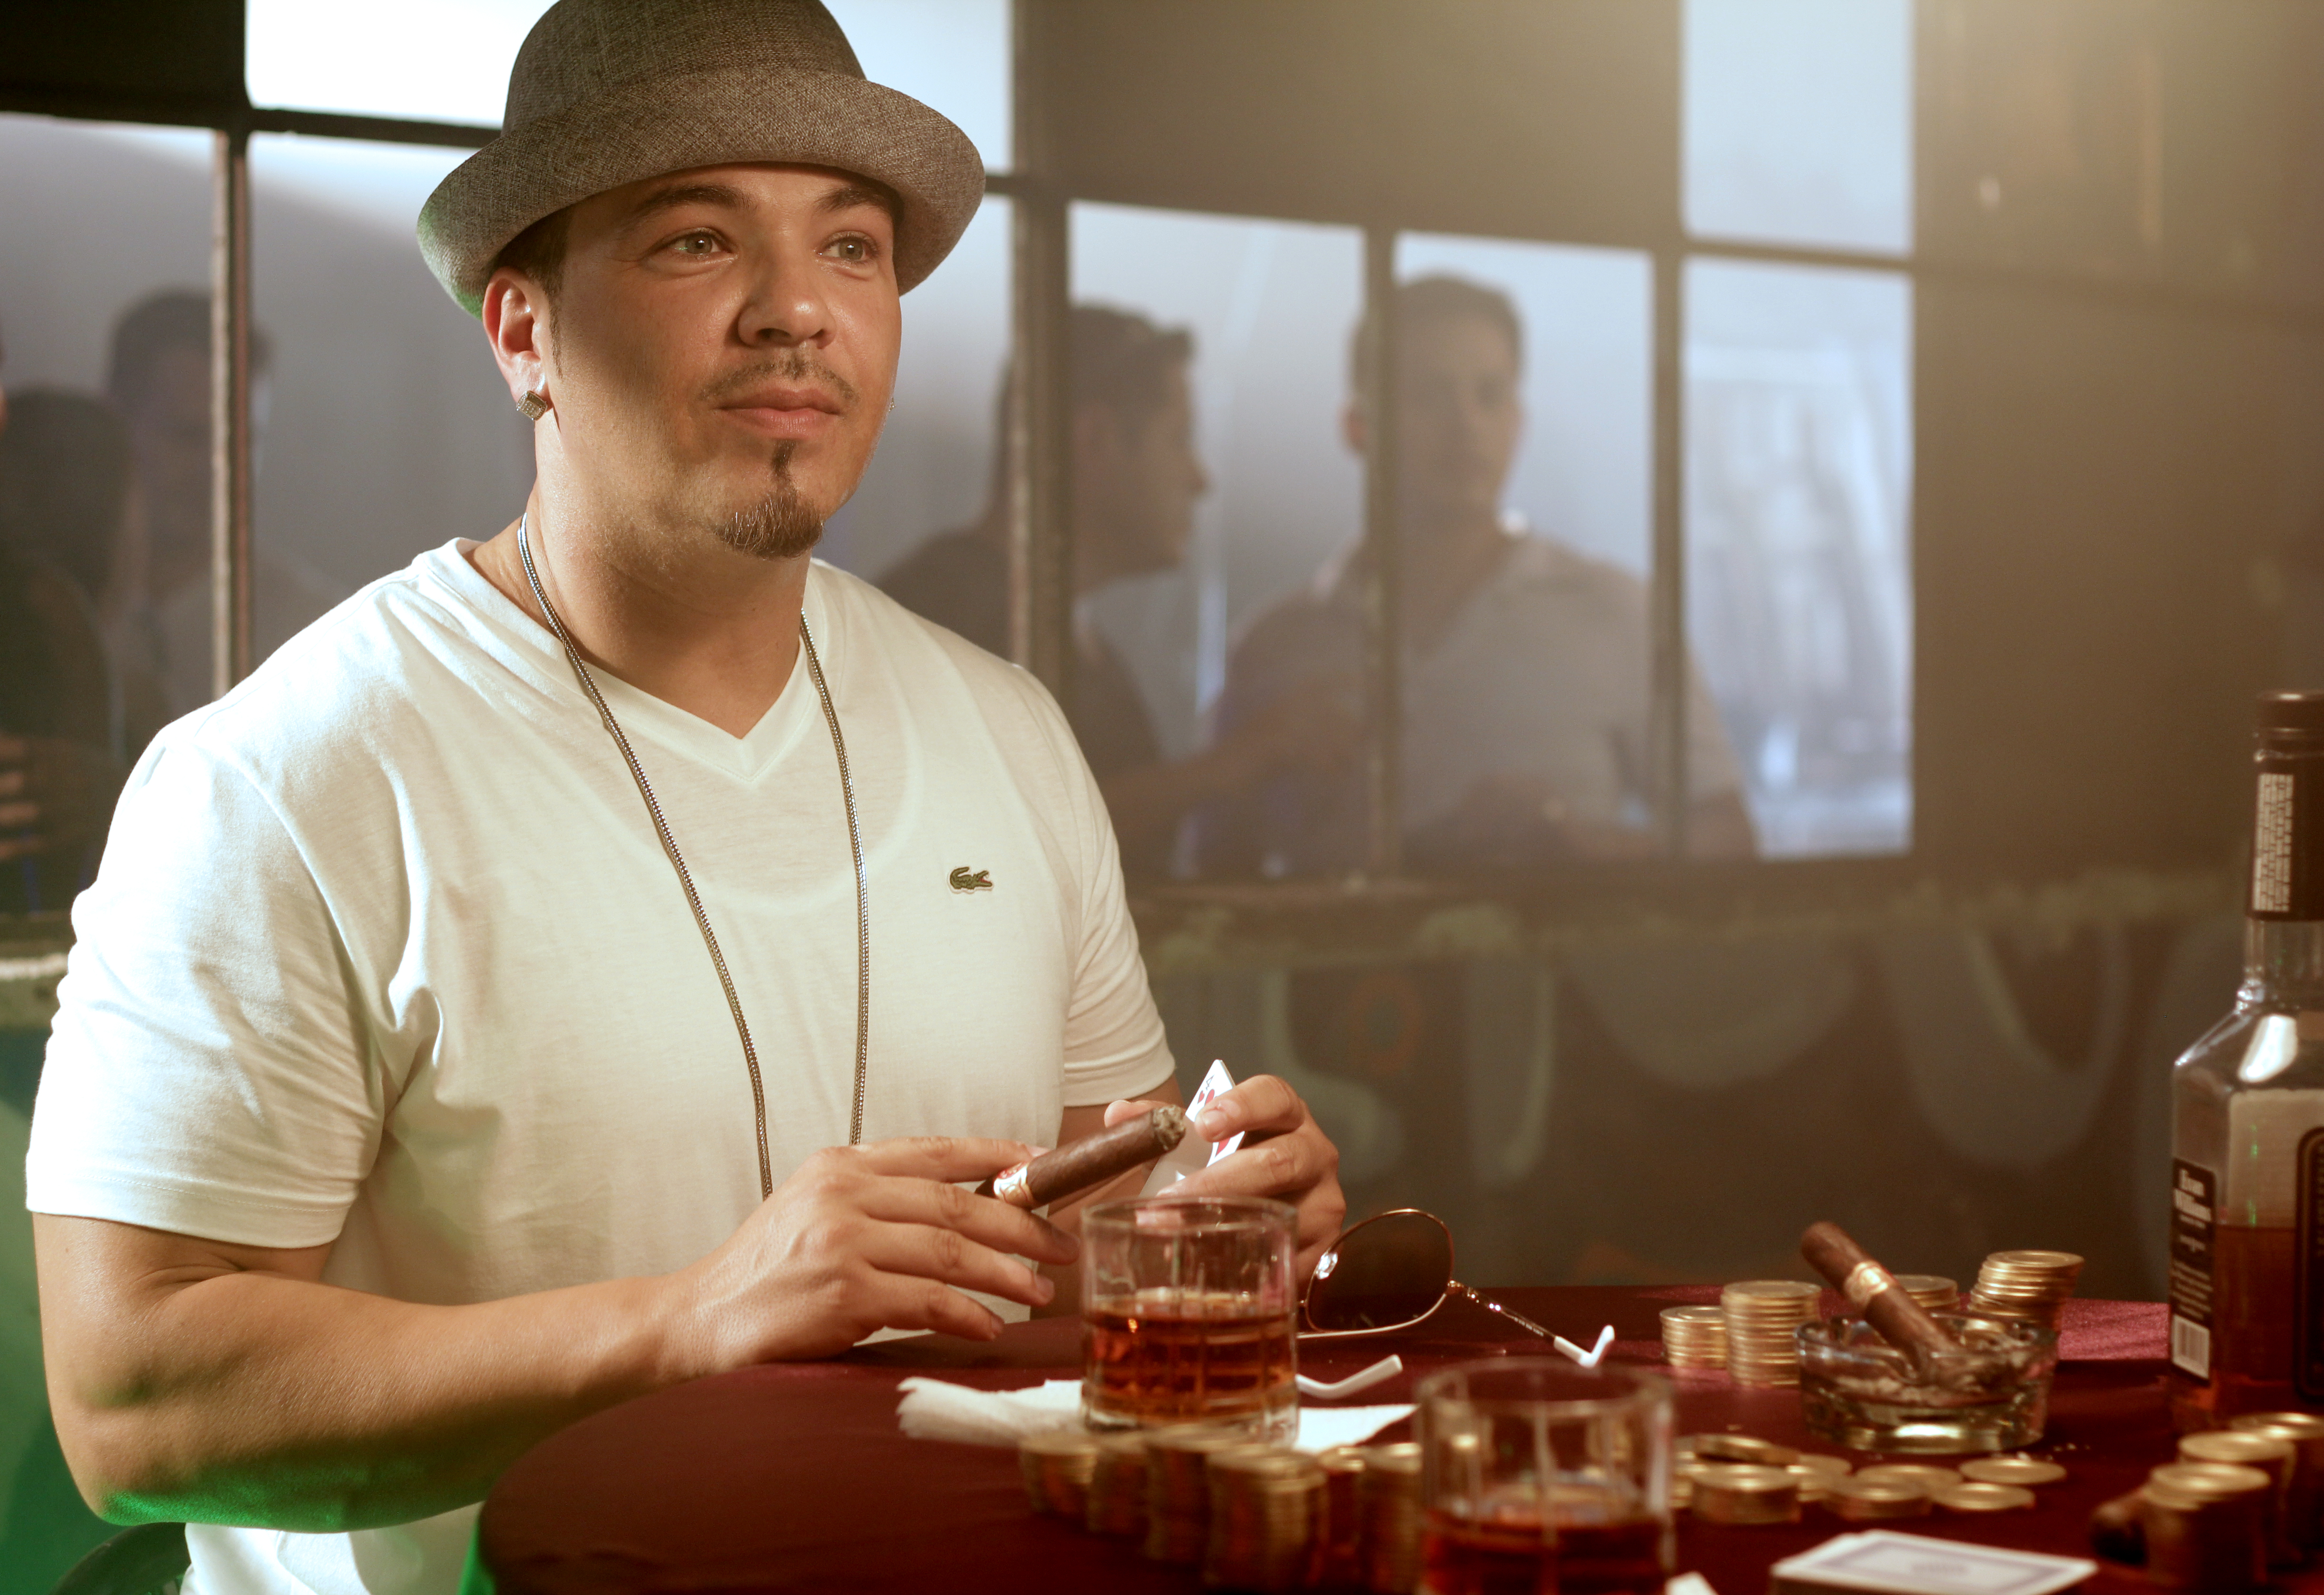 Images of Baby Bash | 4896x3360